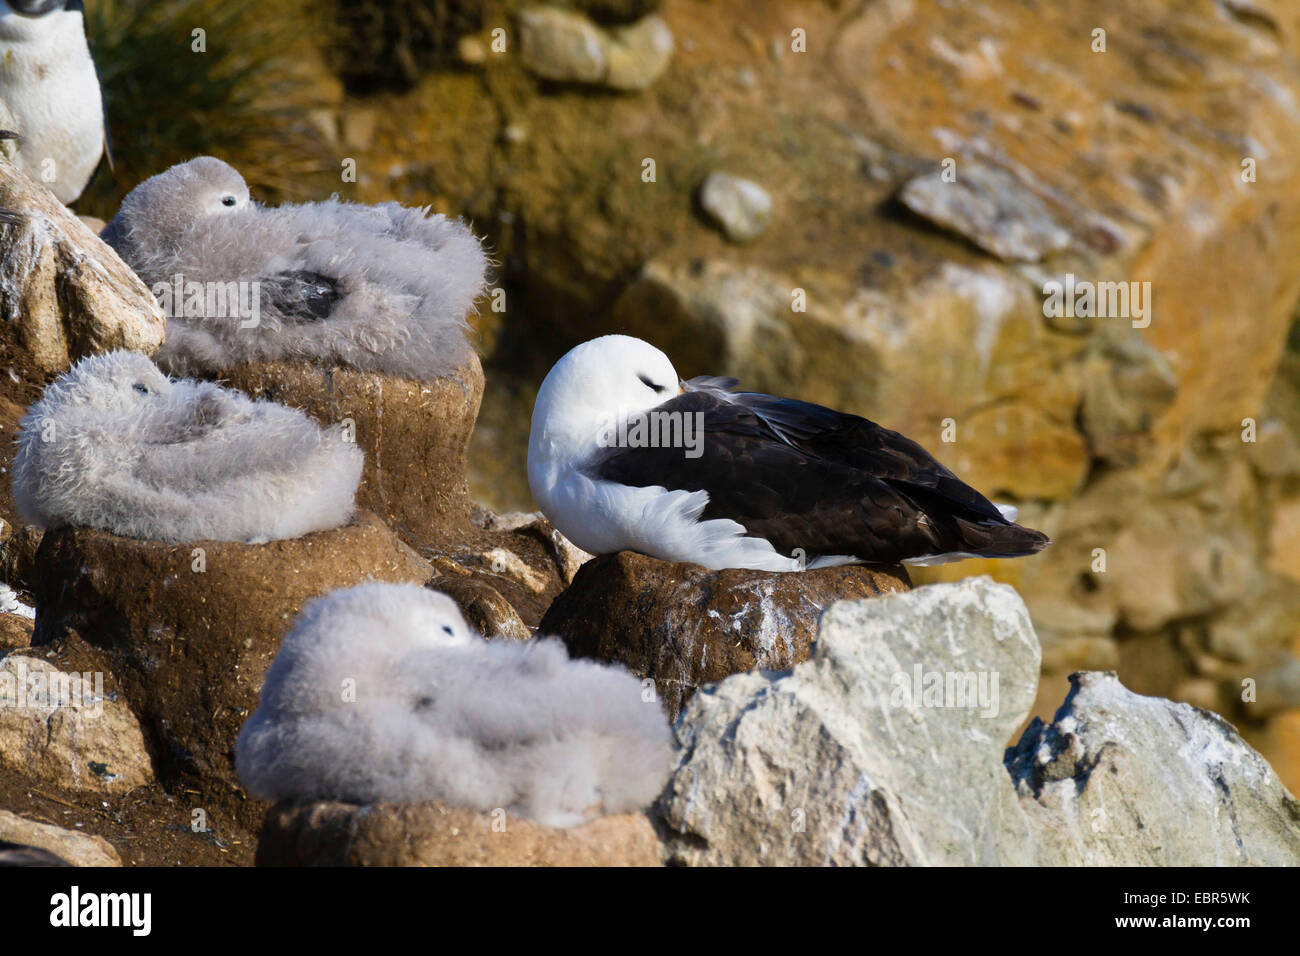 Black-browed albatross (Thalassarche melanophrys, Diomedea melanophris), breeding on a nest in a bird colony with many squeakers and sleeping, Falkland Islands Stock Photo